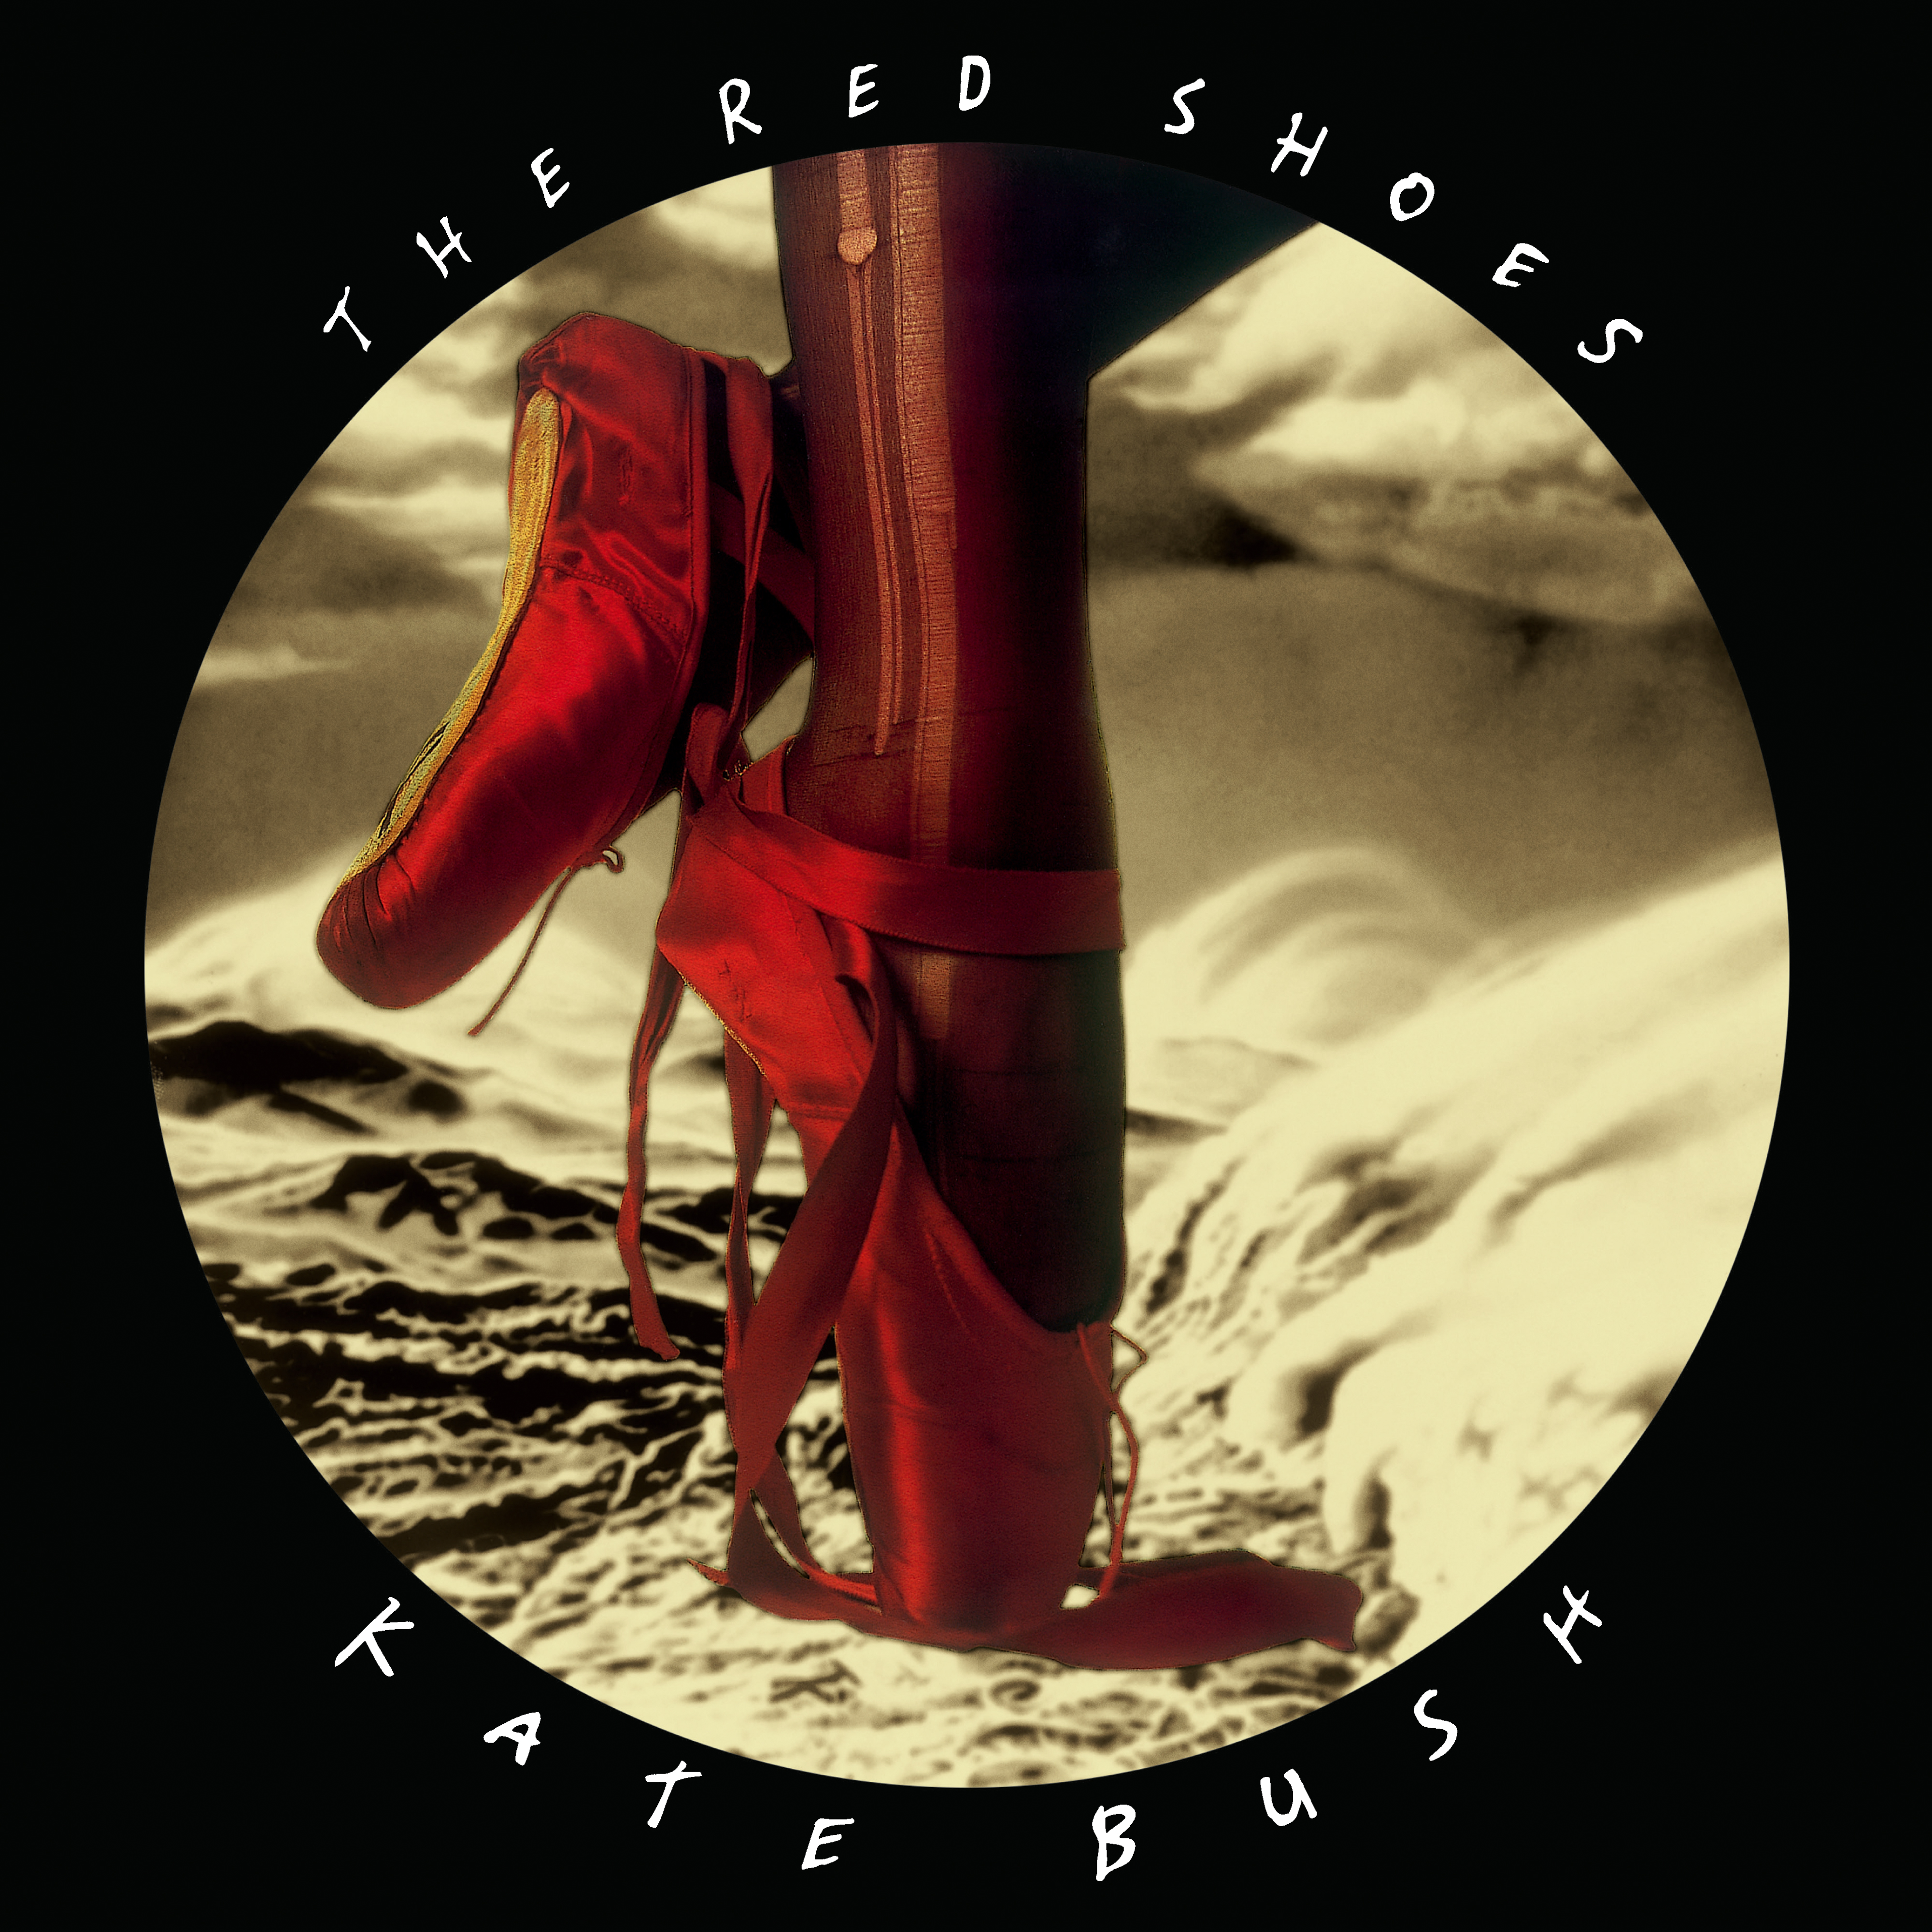 1993-"The Red Shoes" The%20Red%20Shoes%204000